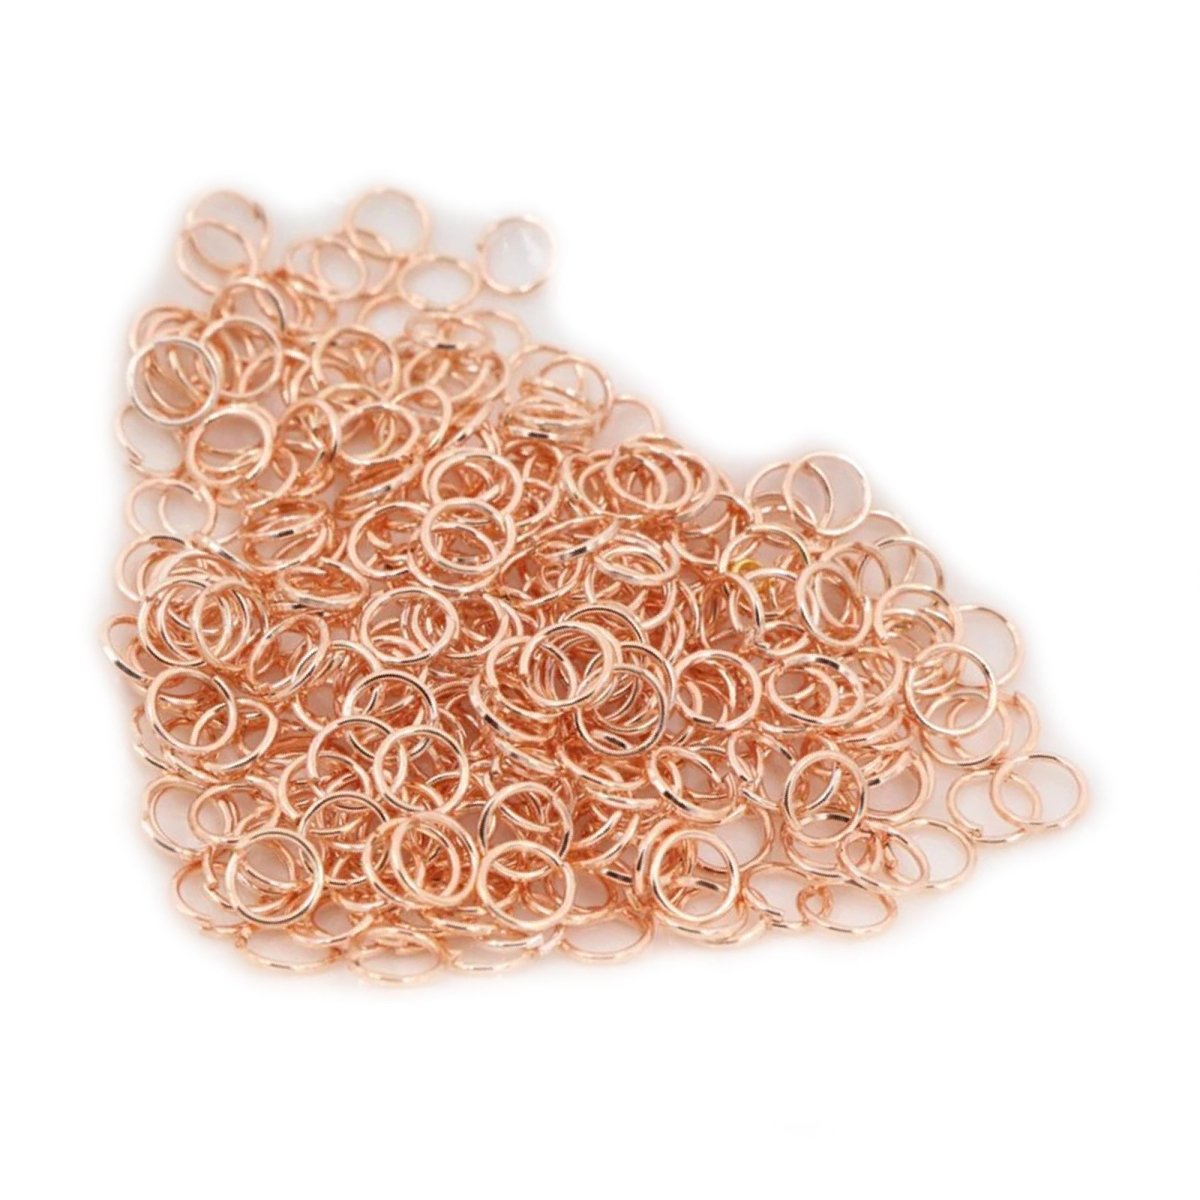 200pcs Open Jump Rings 8mm 10mm 12mm Single Loop Rhodium Light Silver Gold KC Gold Keyrings Small - 10mm Rose Gold - - Asia Sell